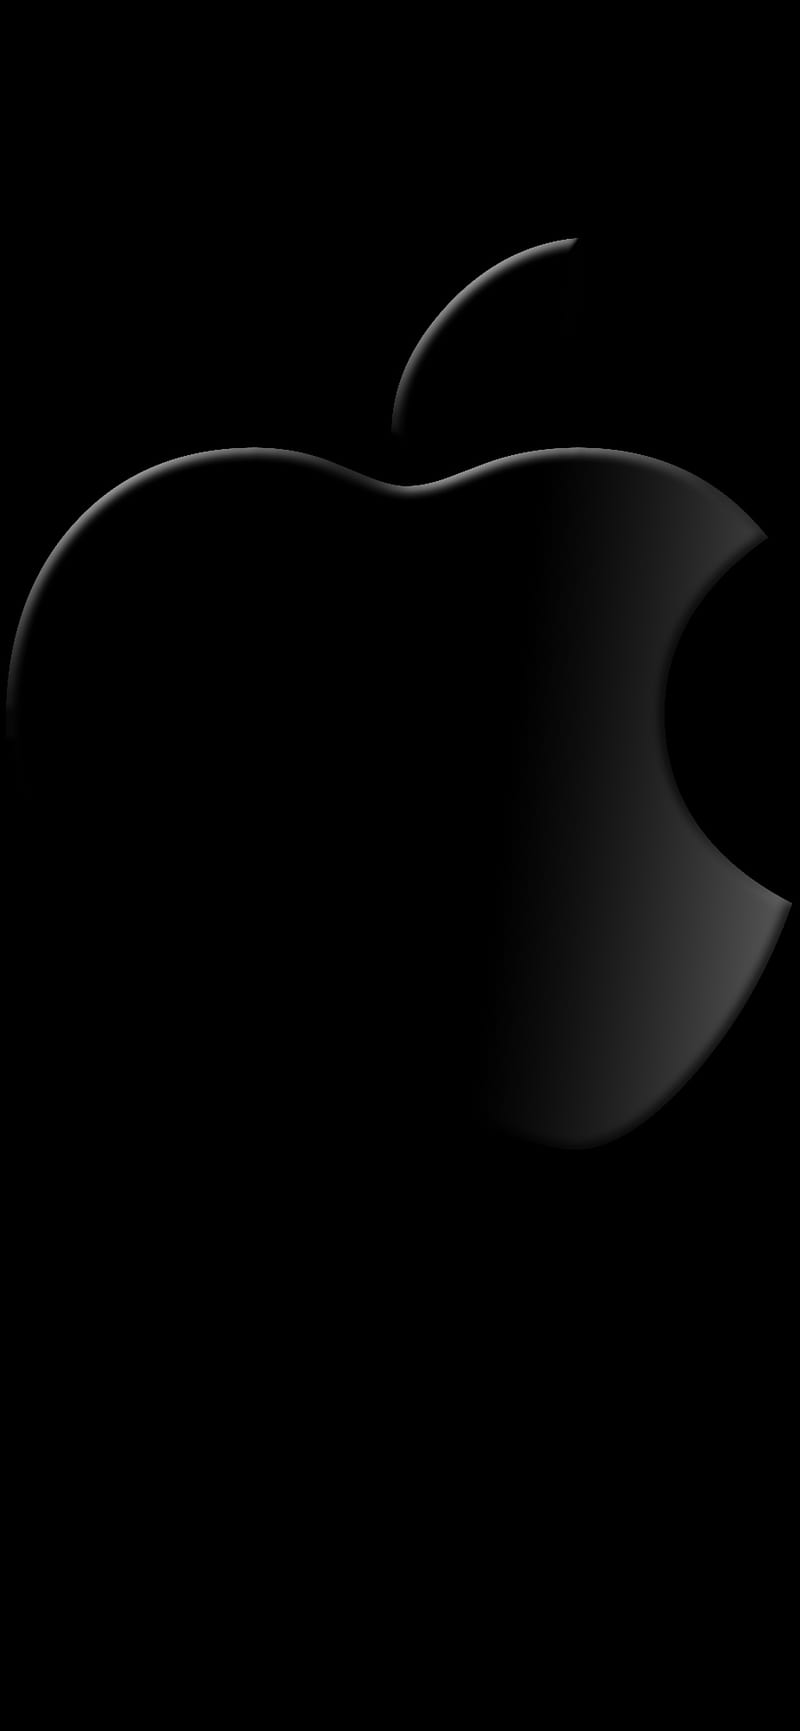 apple event, love, gray, honor, black, hole, lovely, abstract, apple, HD phone wallpaper